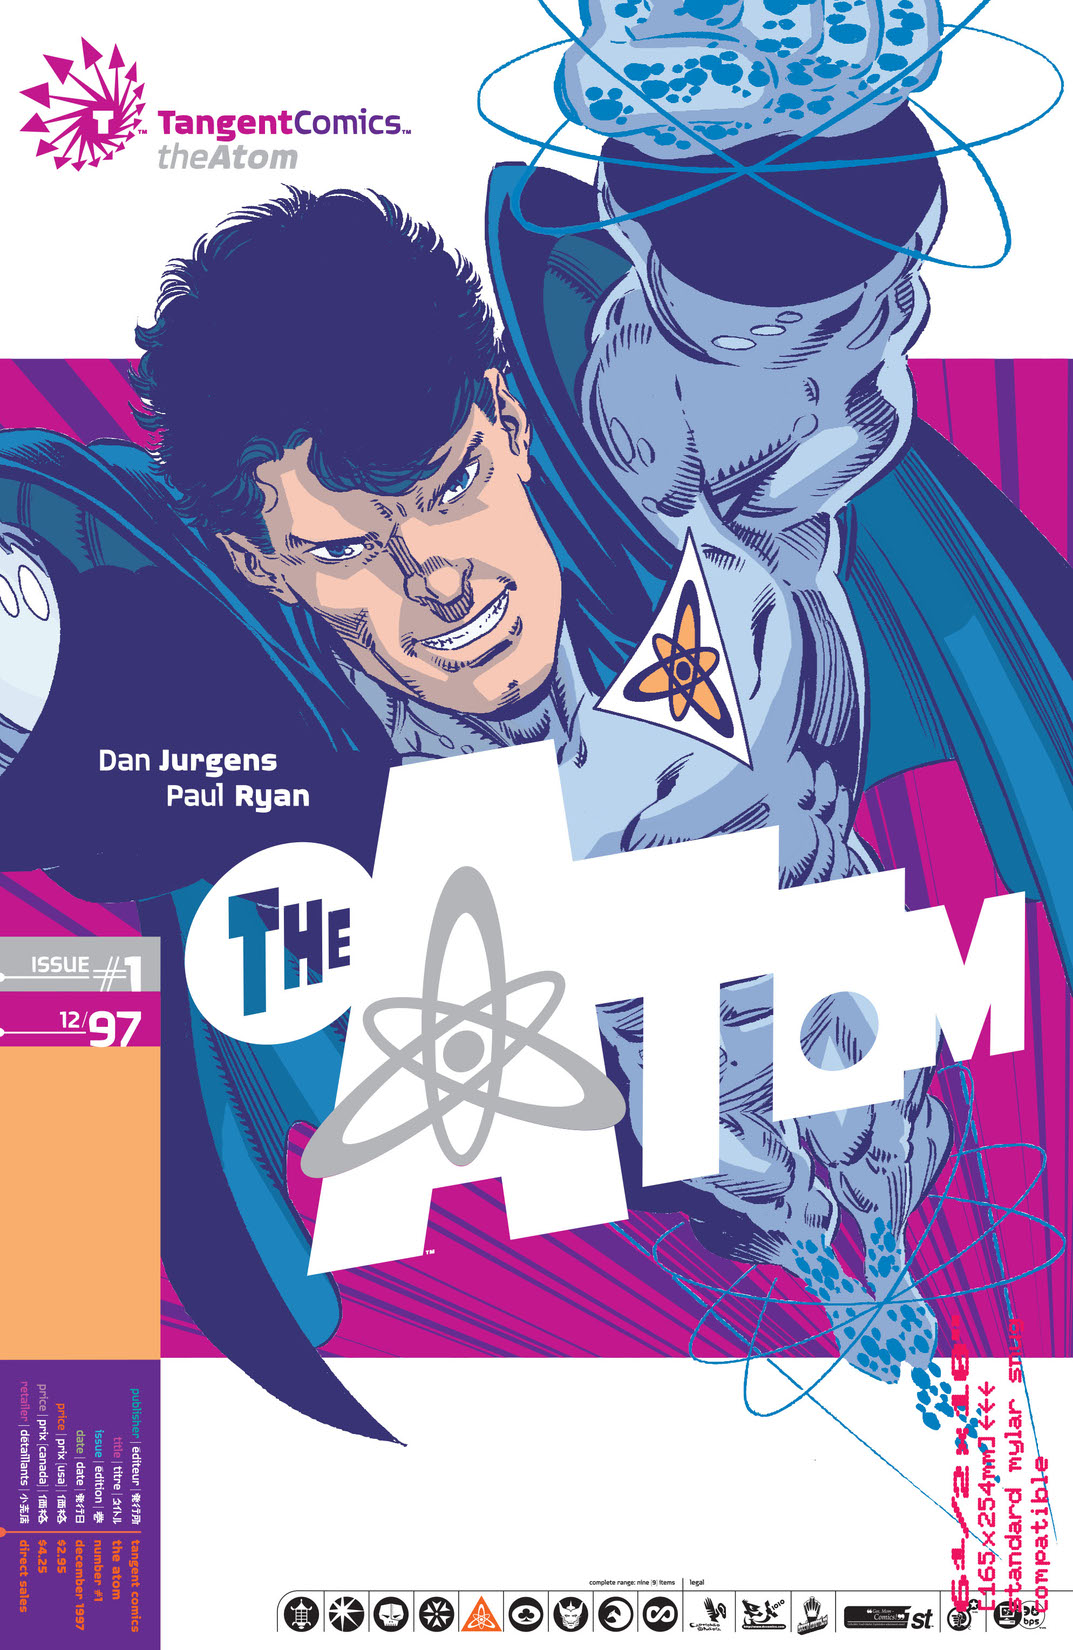 The Atom #1 preview images